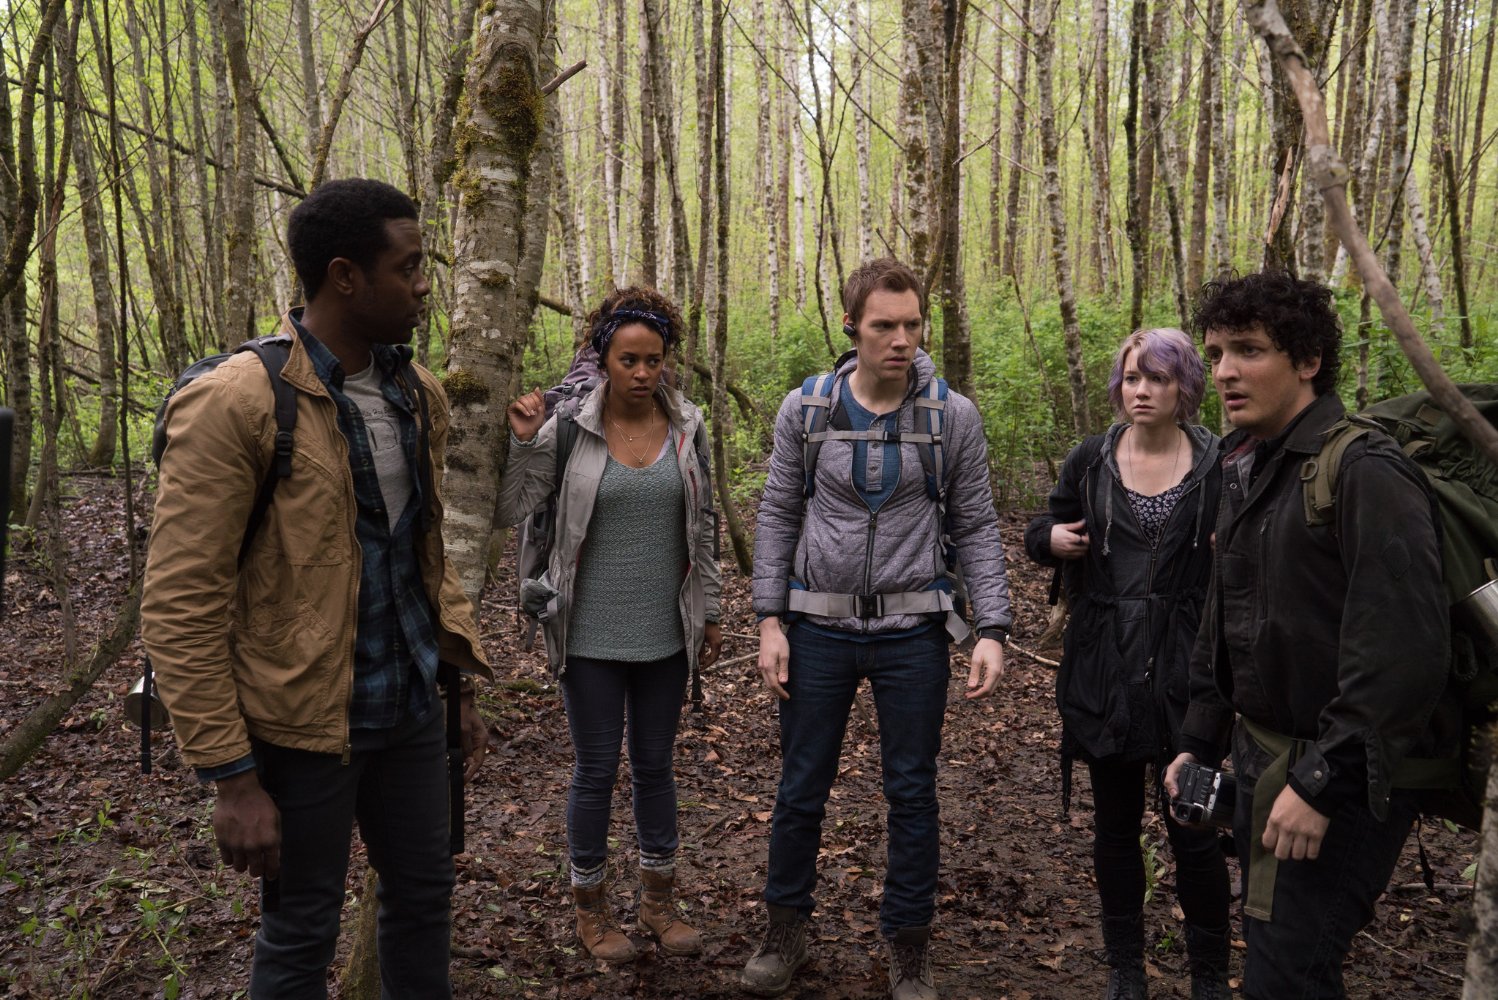 A new party venturing into the Burkittsville woods - (l to r) Brandon Scott, Corbin Reid, James Allen McCune, Valorie Curry and Wes Robinson - in Blair Witch (2016)